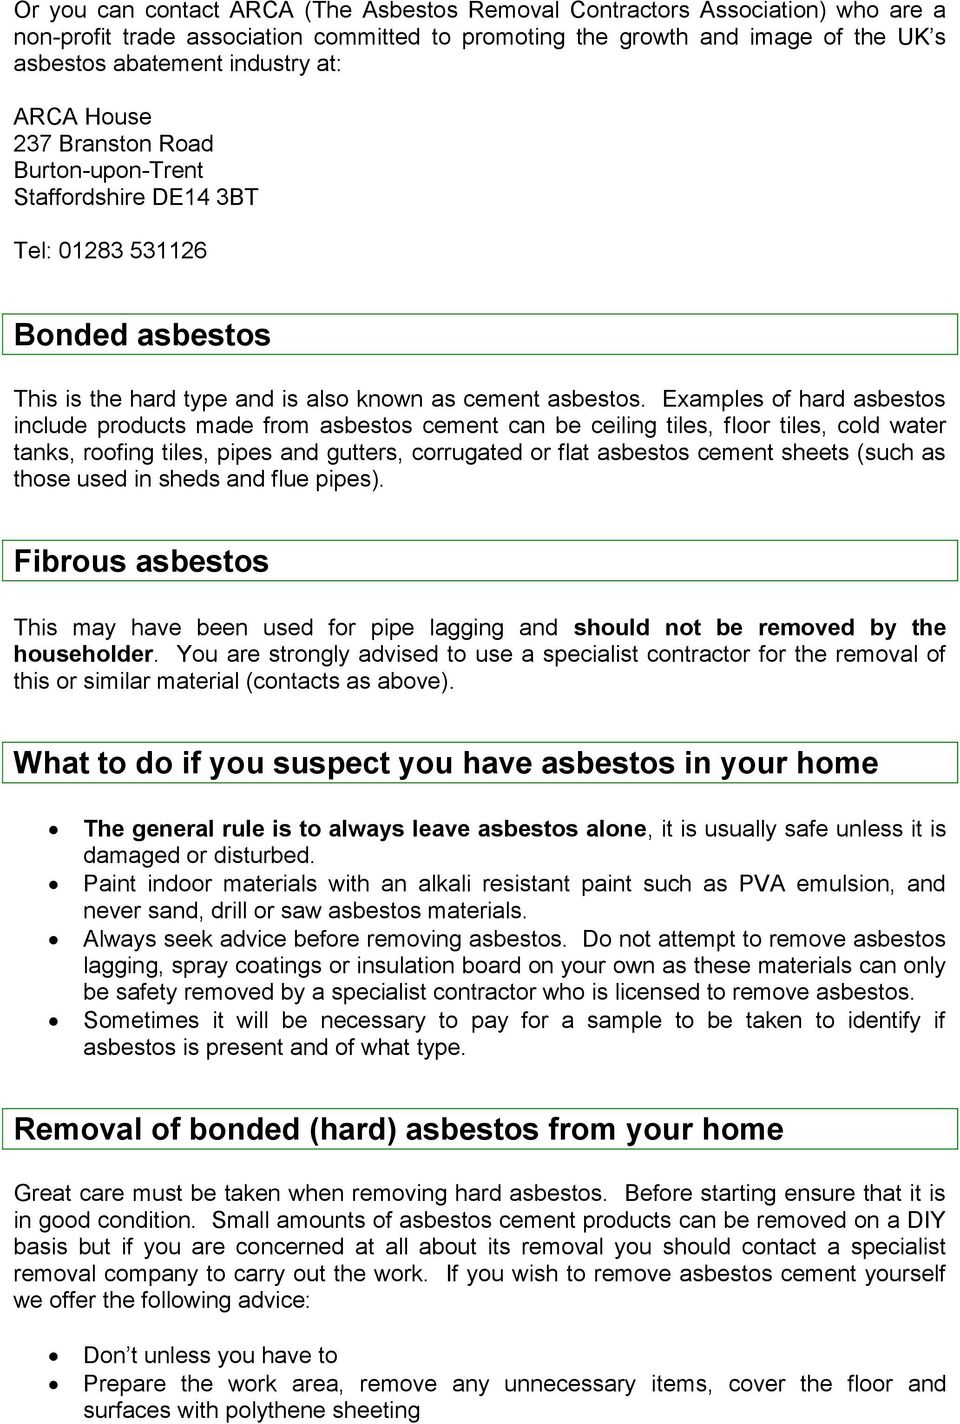 Examples of hard asbestos include products made from asbestos cement can be ceiling tiles, floor tiles, cold water tanks, roofing tiles, pipes and gutters, corrugated or flat asbestos cement sheets